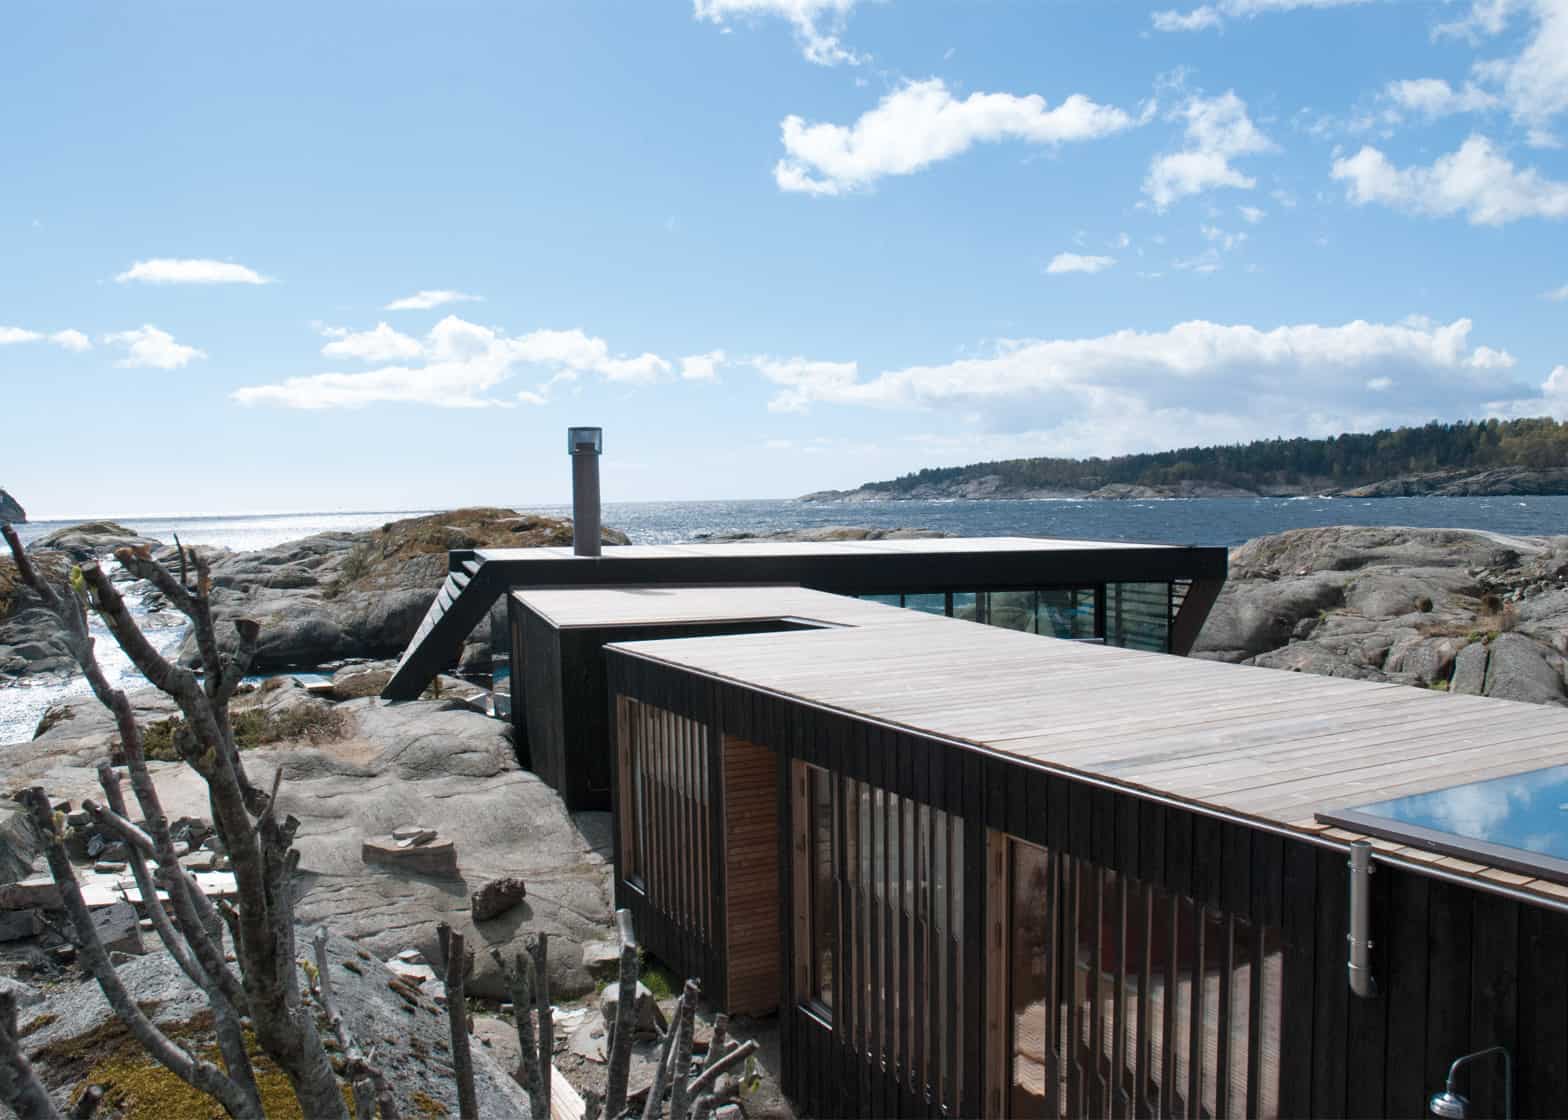 4 boat access only 75sqm summer cabin straddles boulders